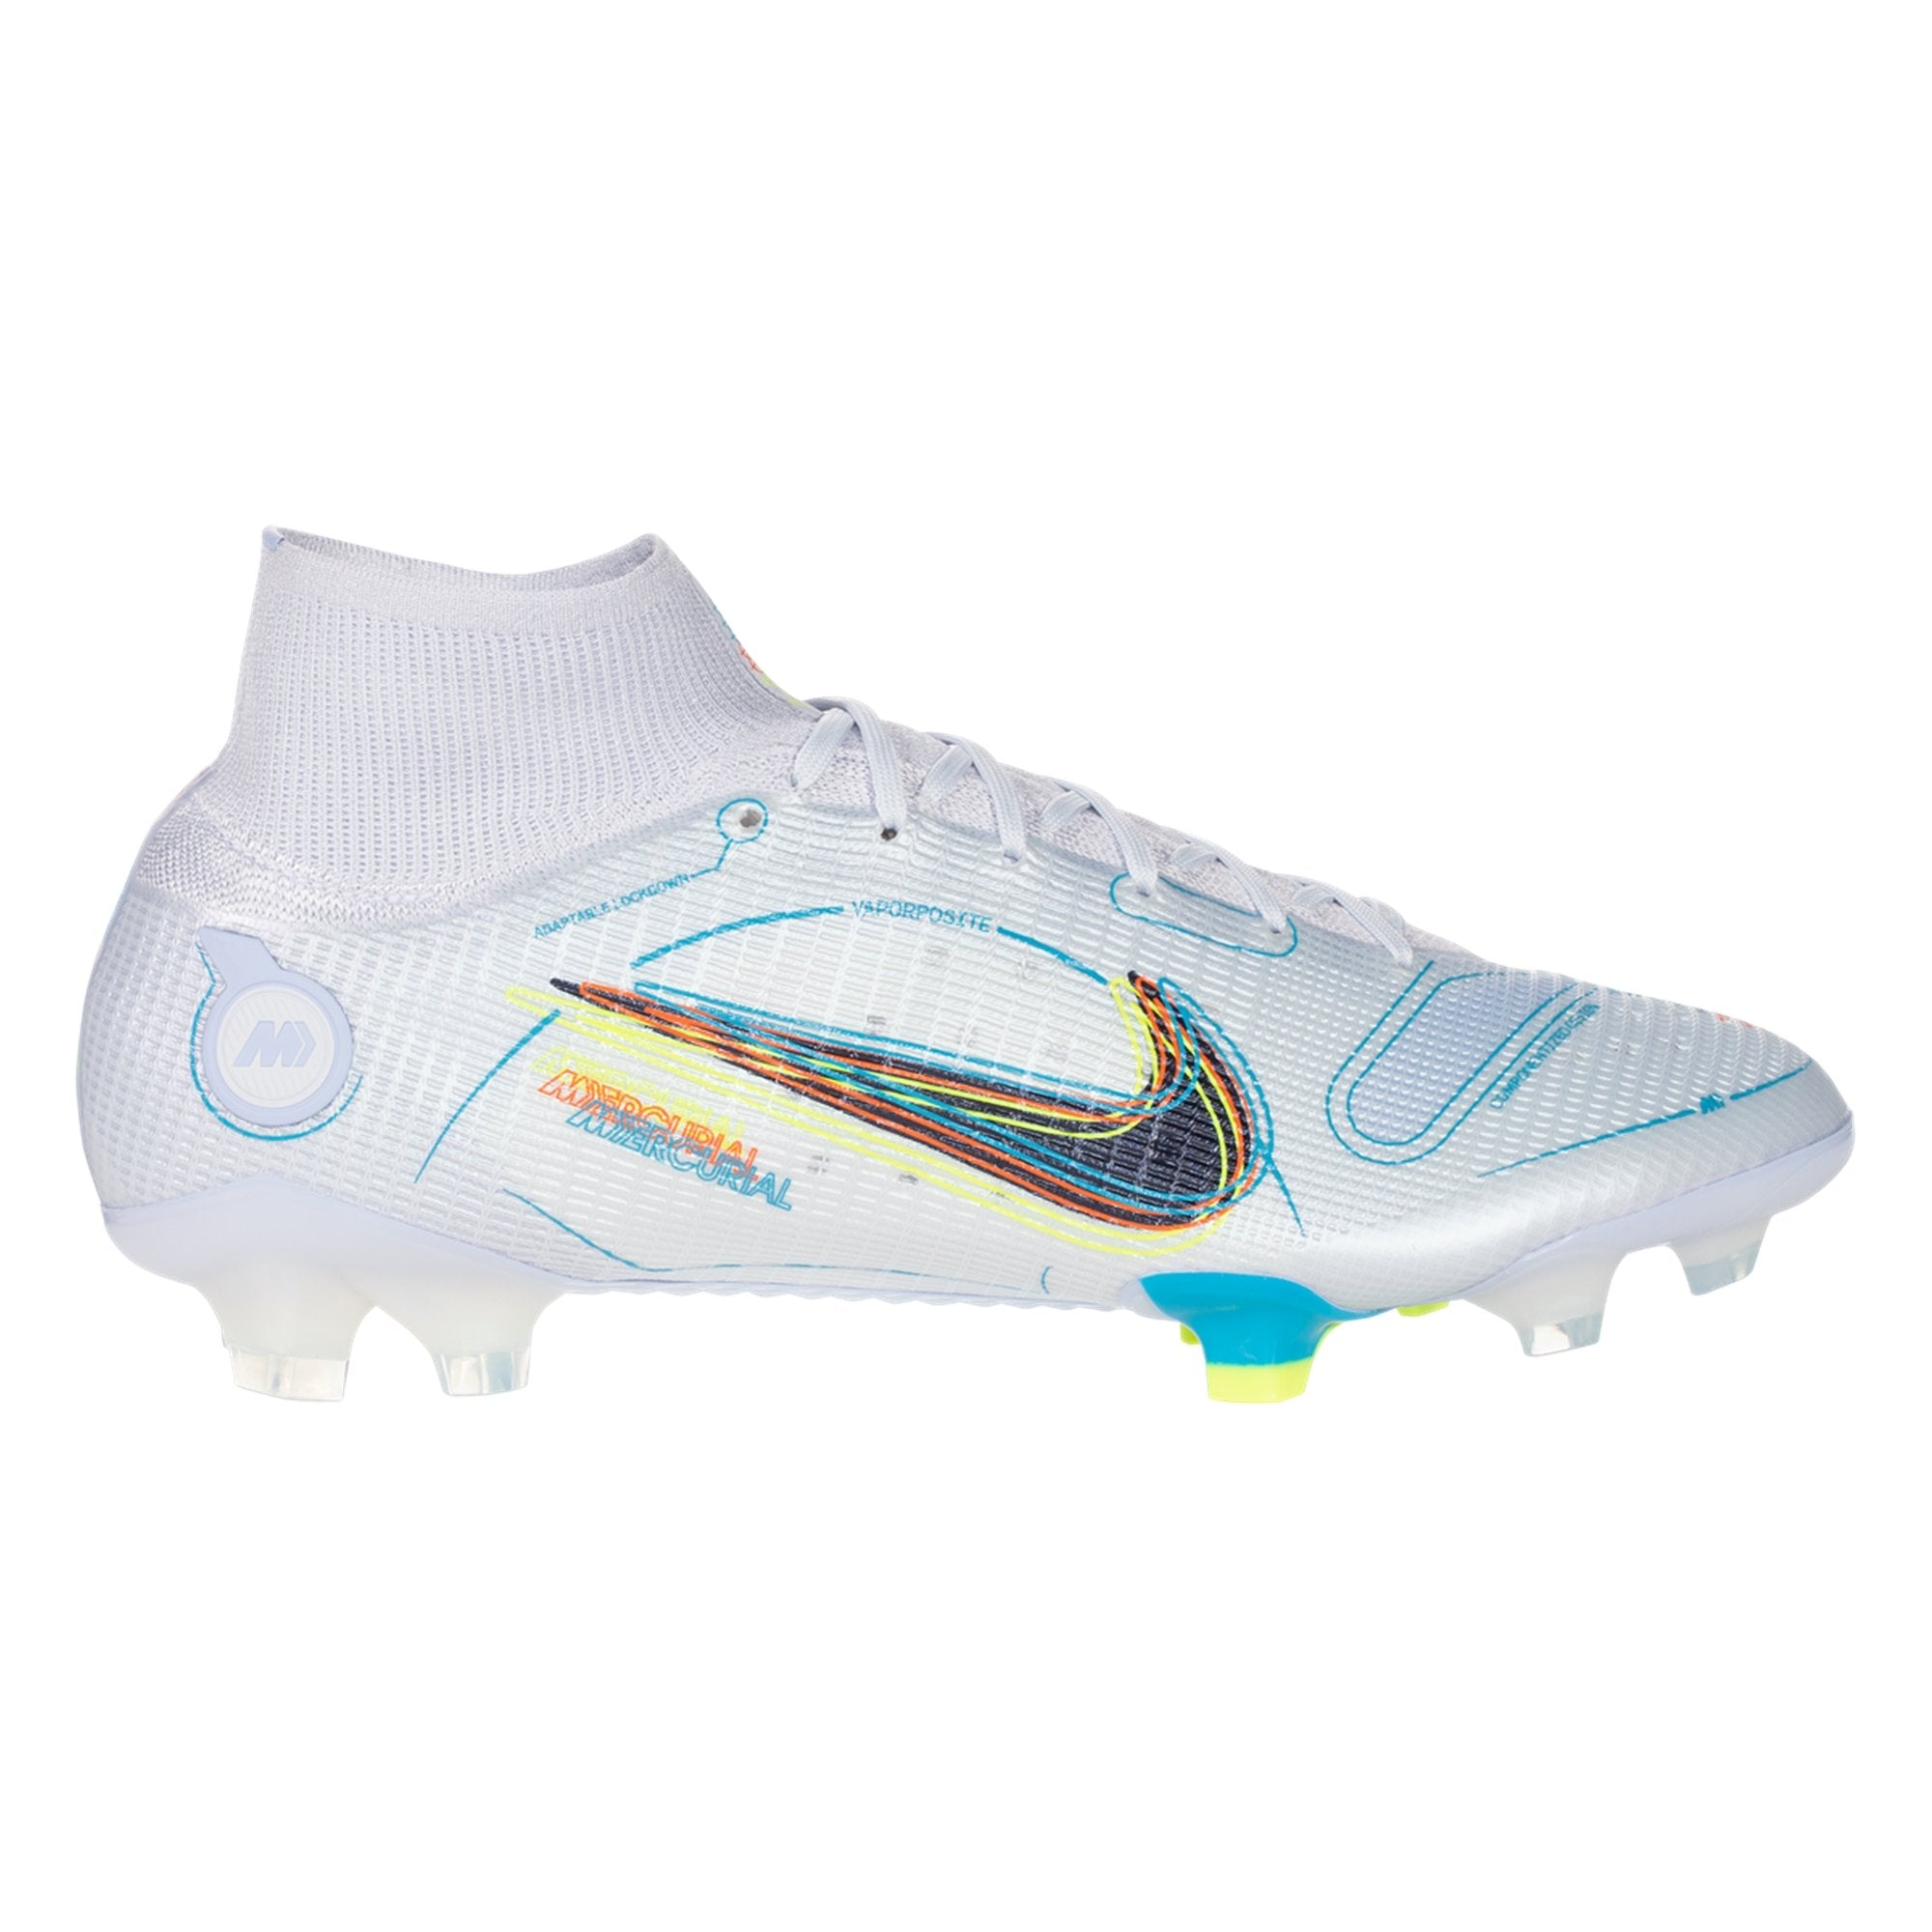 cool blue nike soccer cleats